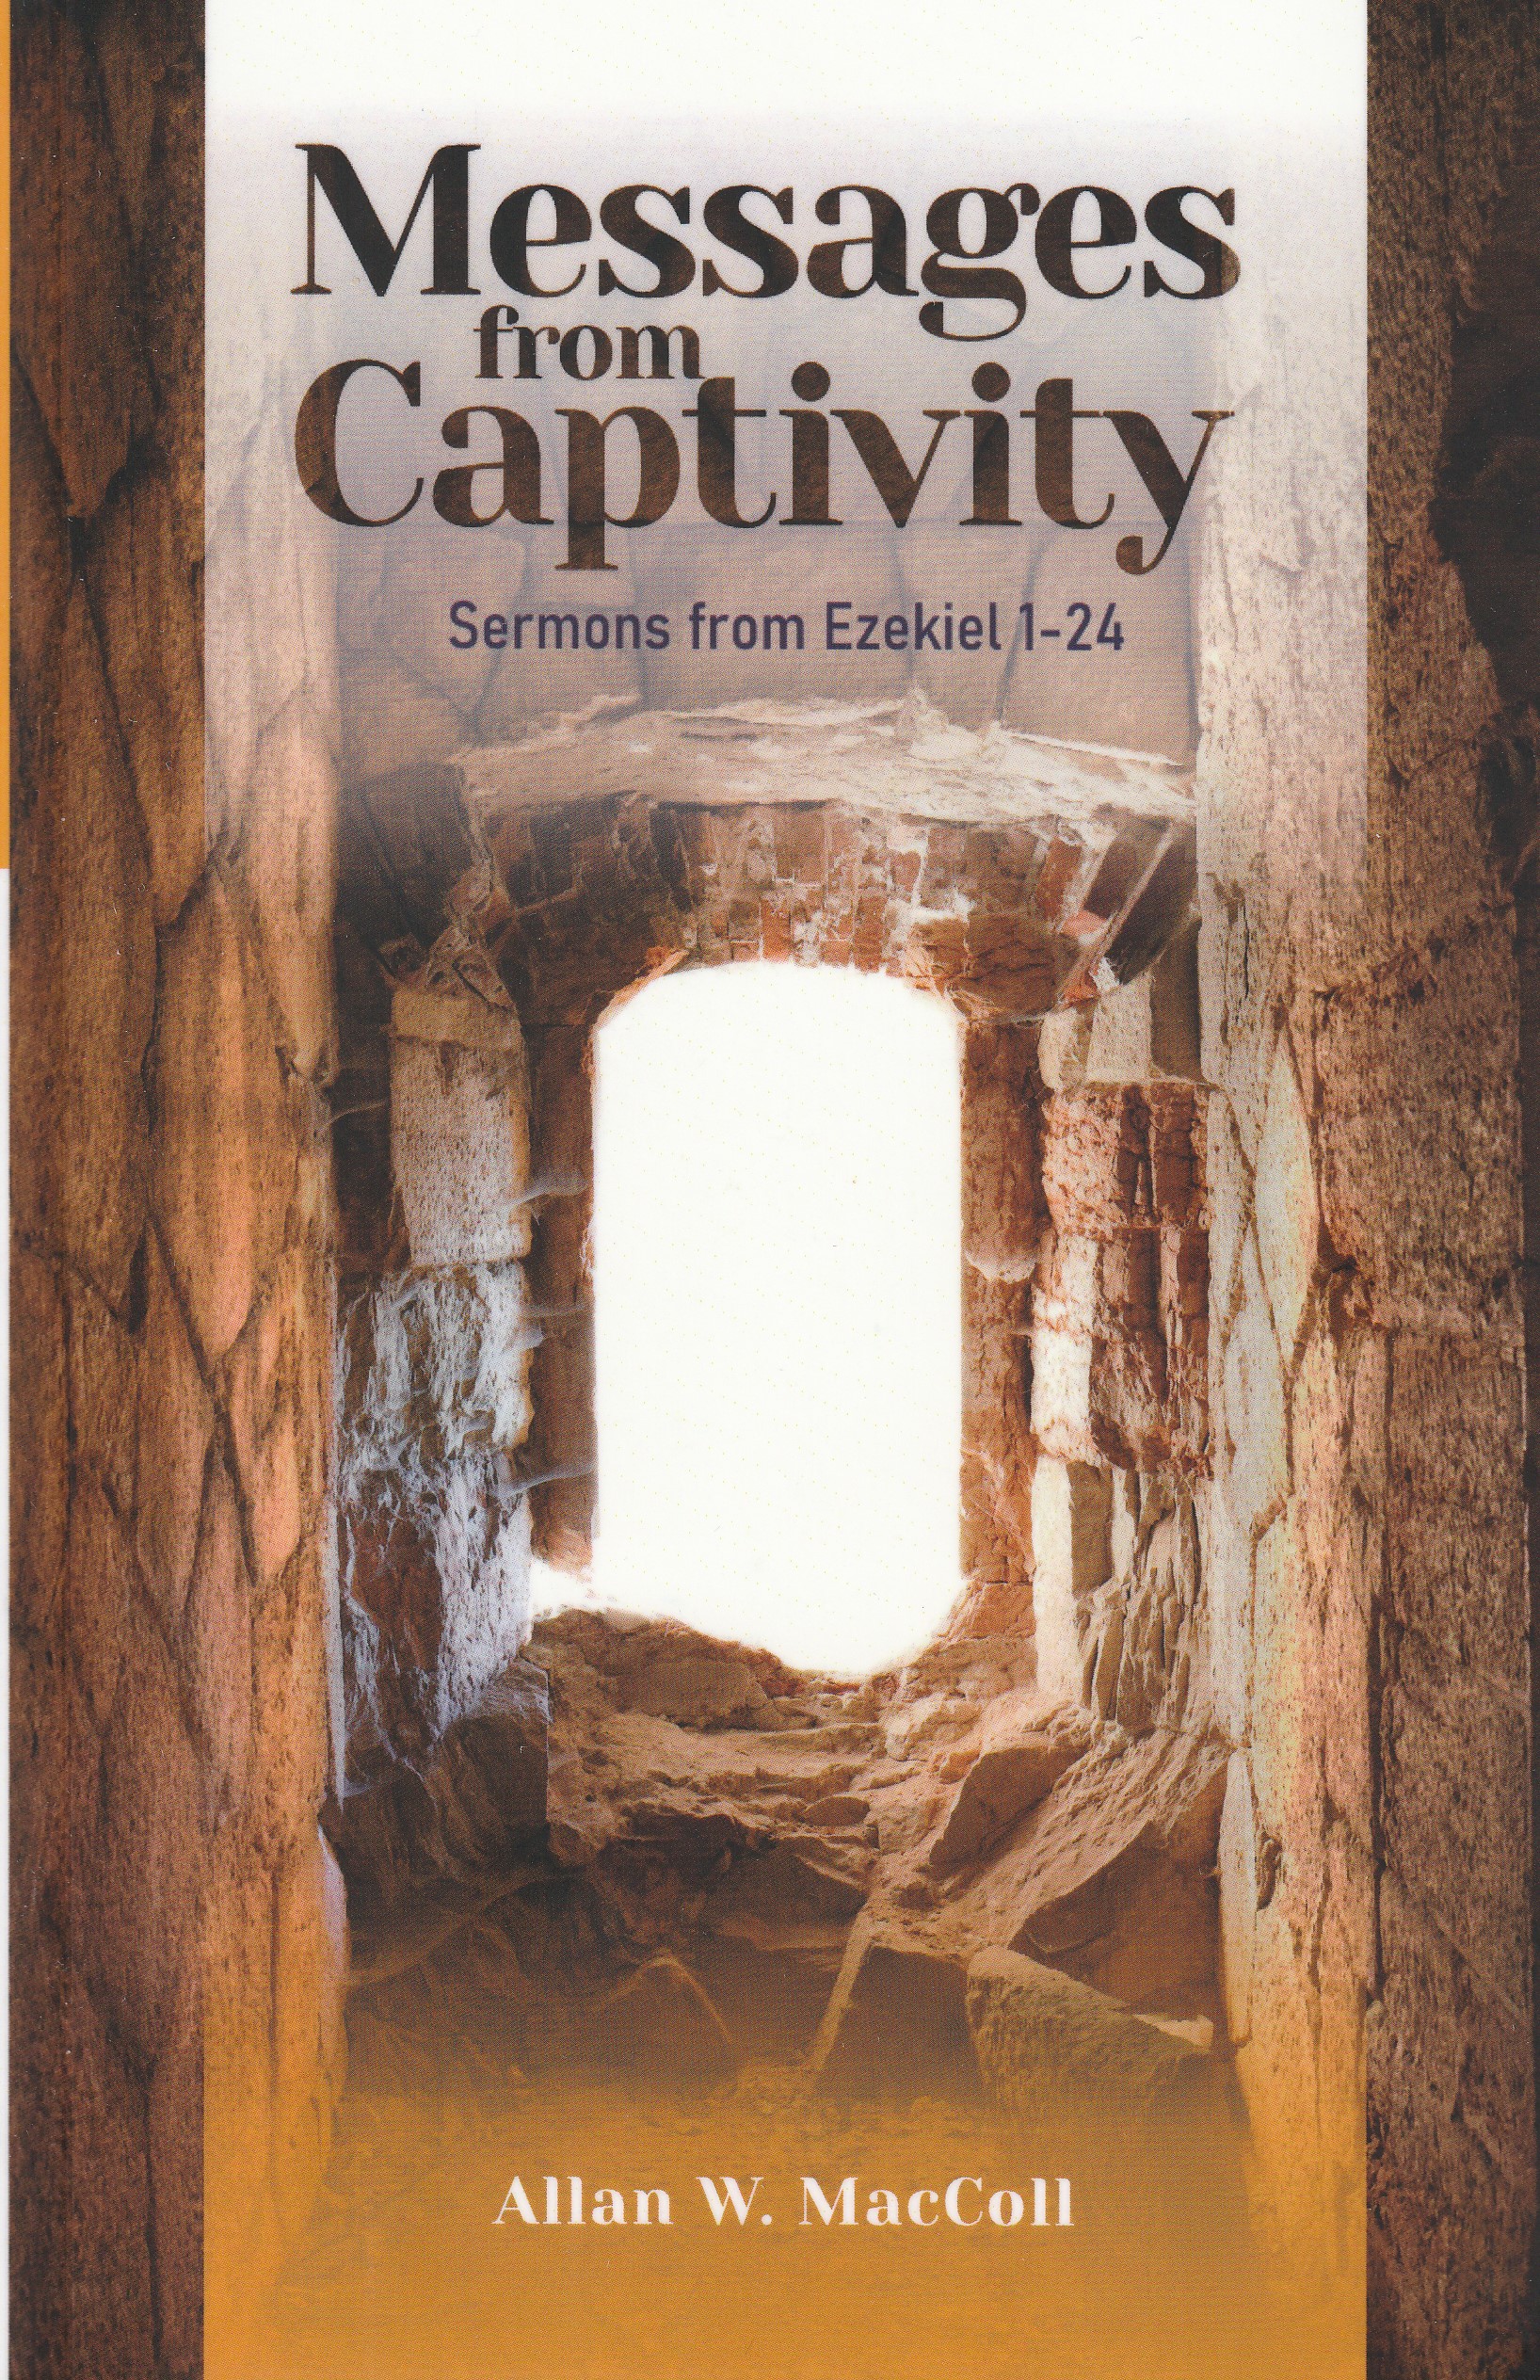 Messages from Captivity: Sermons from Ezekiel 1-24, Special Offer: 6.79 (RRP: 8.50)